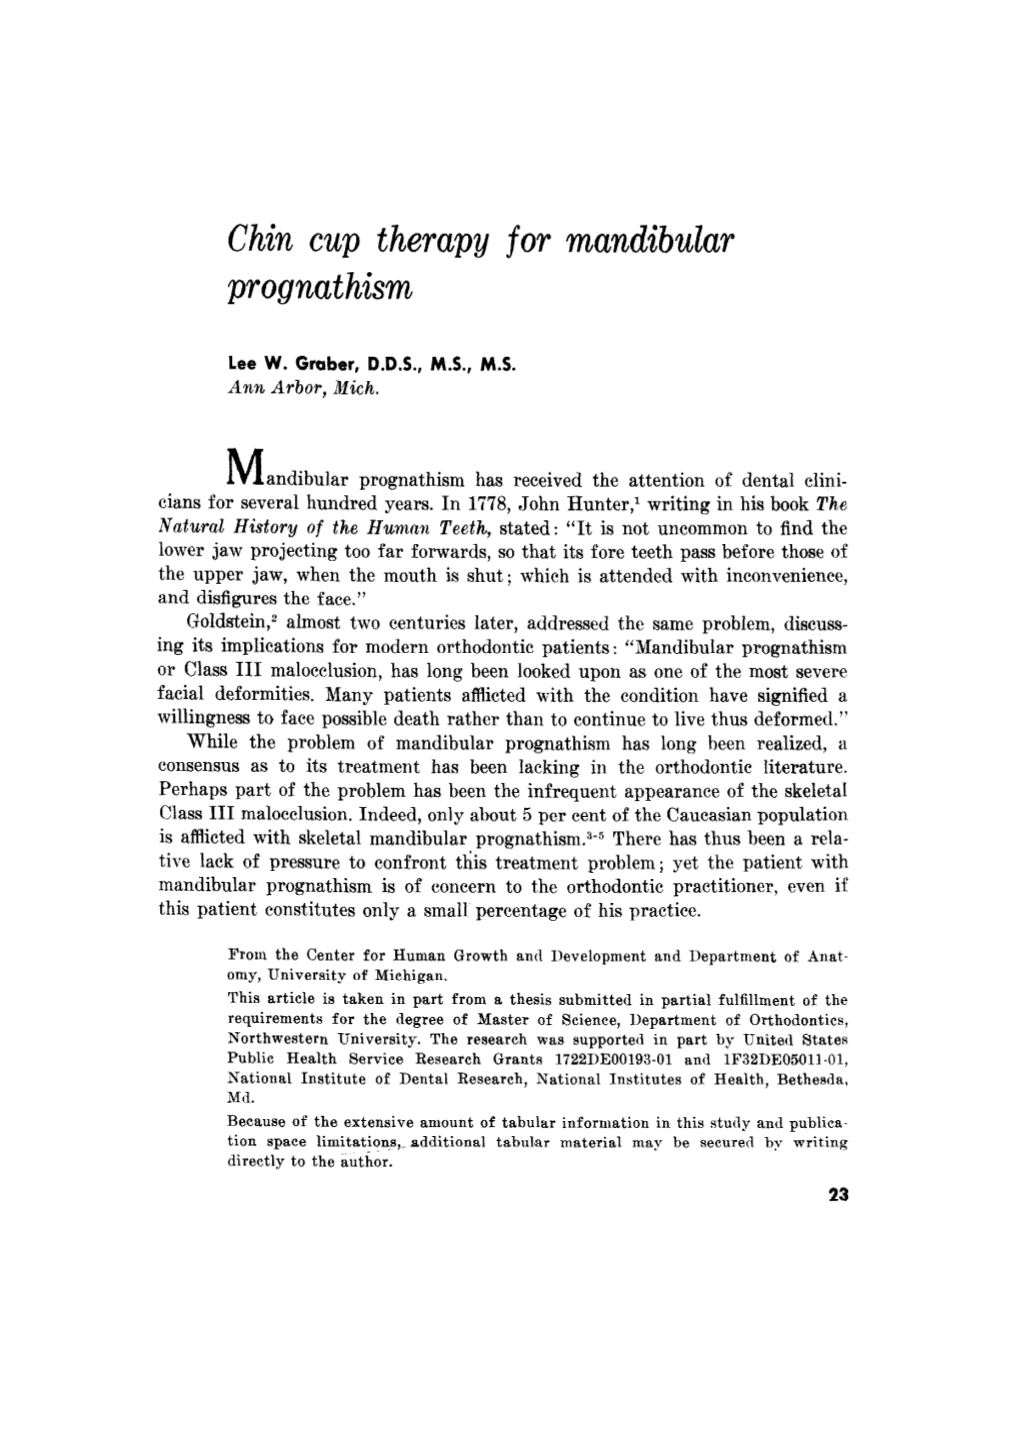 Chin Cup Therapy for Mandibular Prognathism